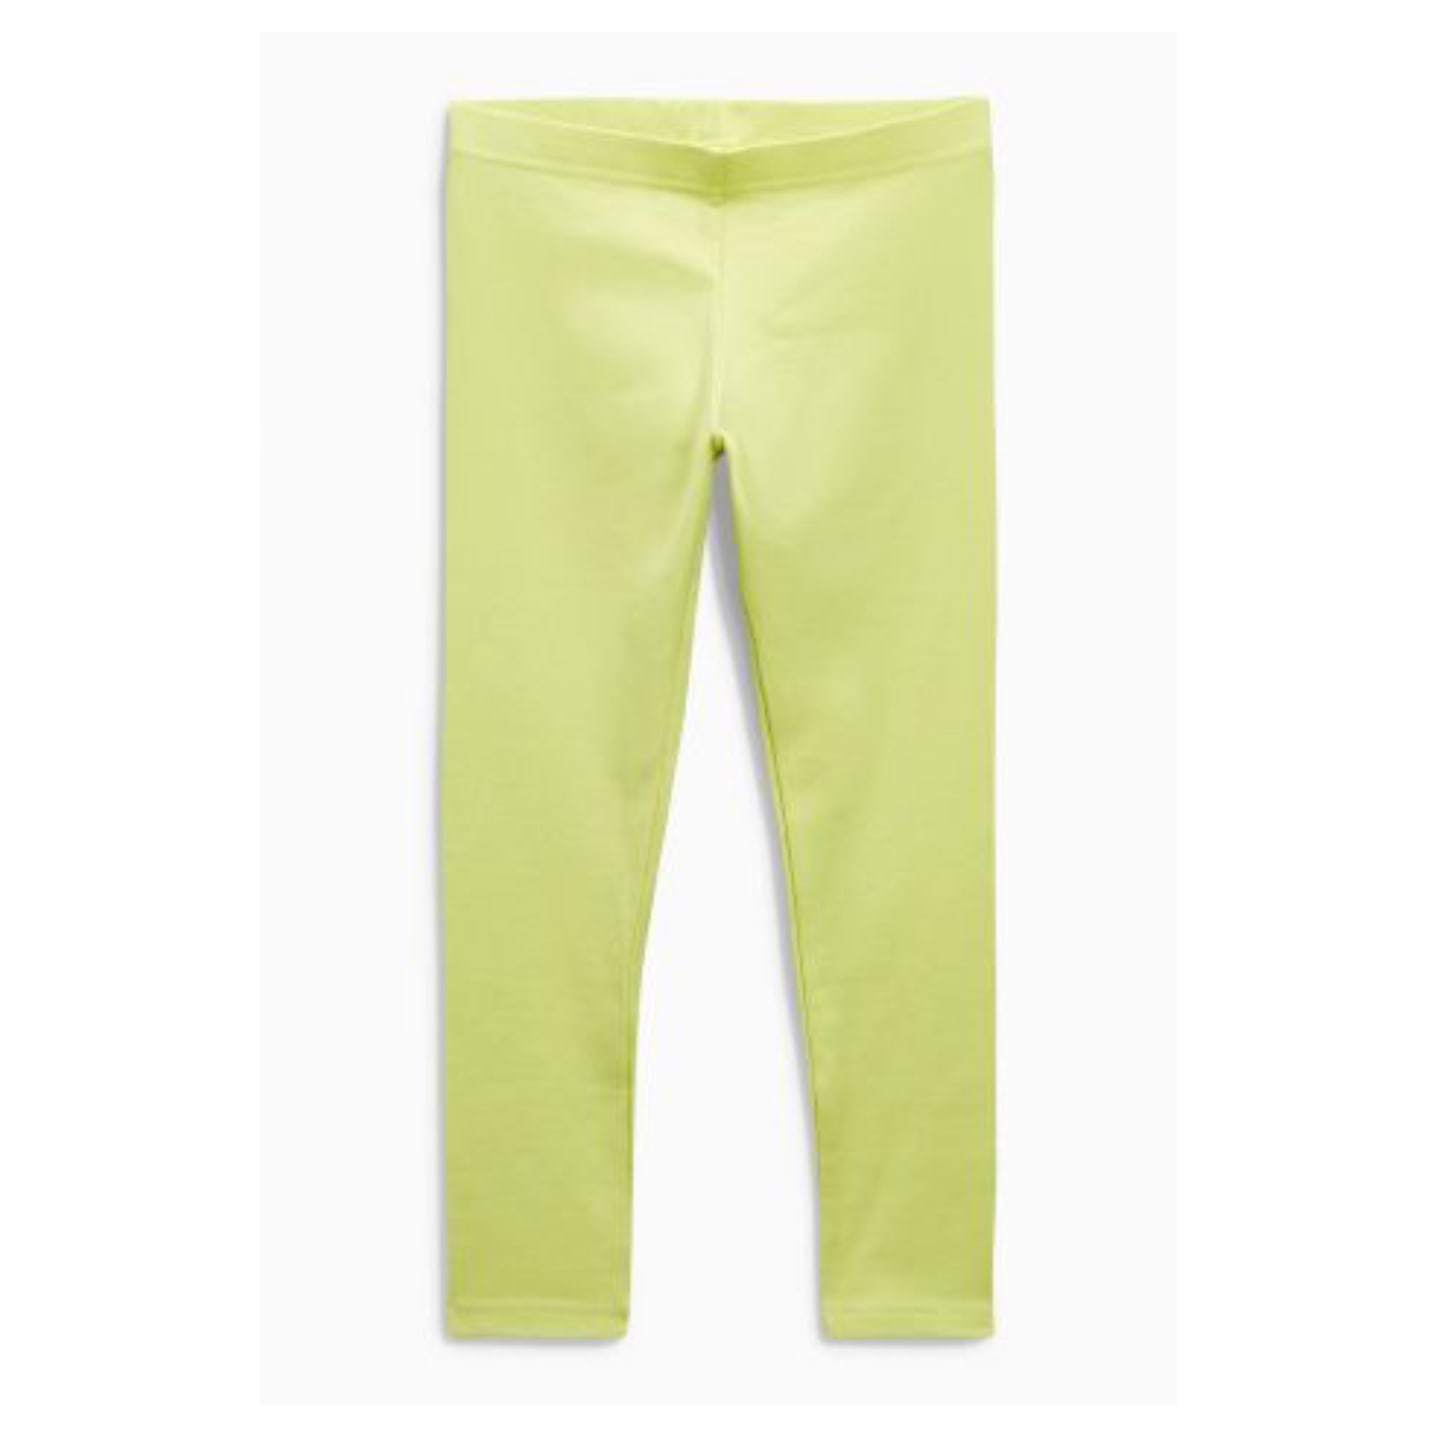 Next Lime Leggings - Stockpoint Apparel Outlet